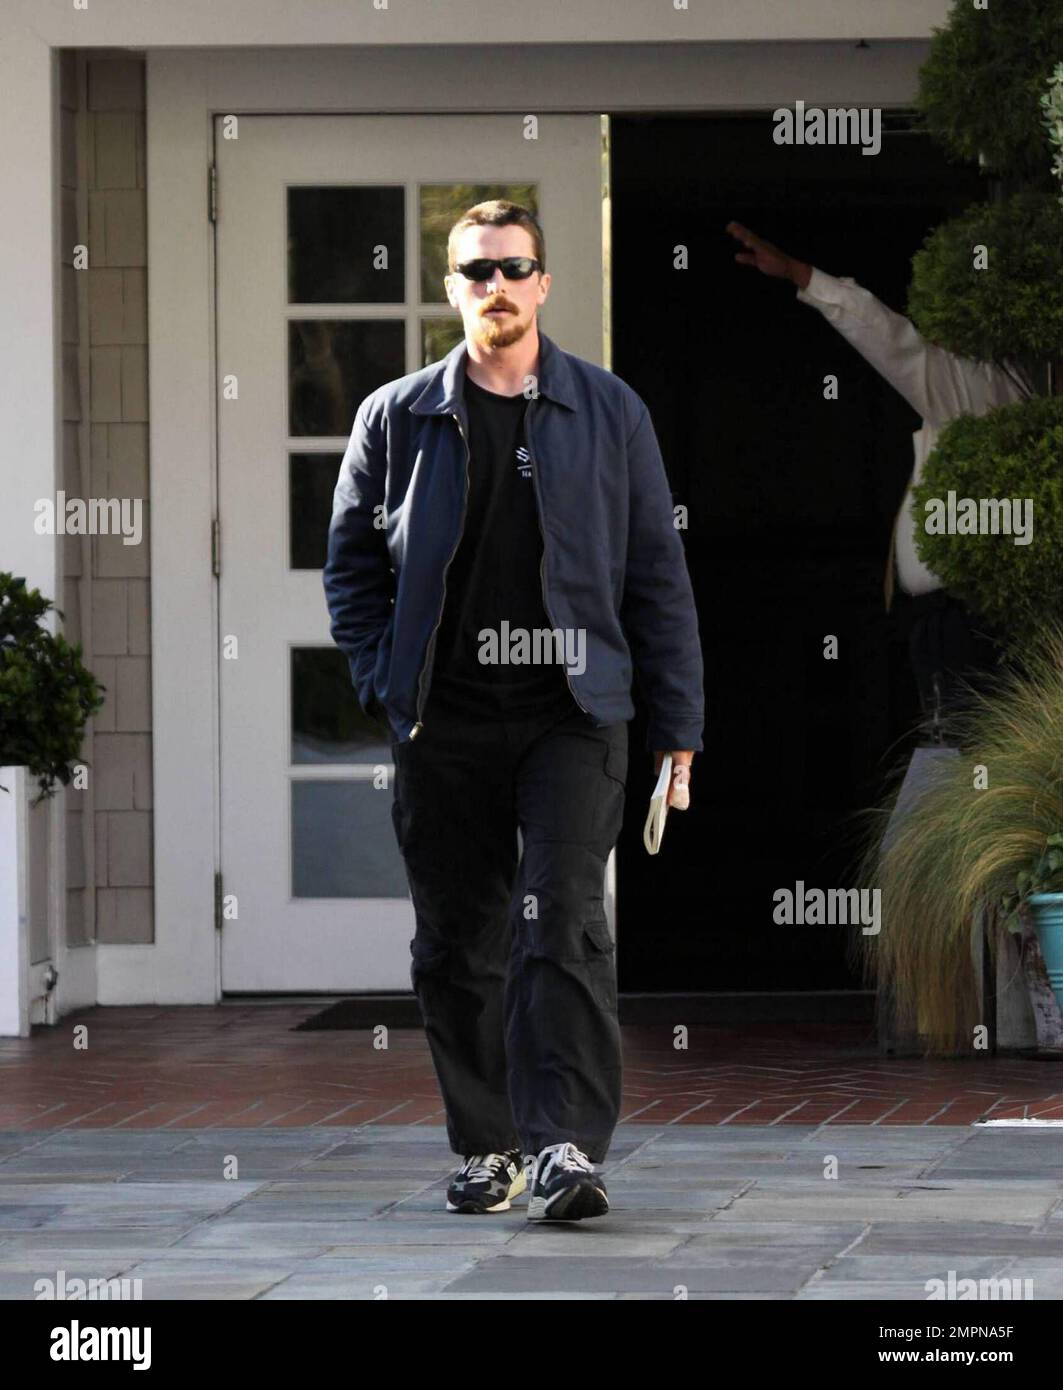 Exclusive!! Christian Bale leaves a lengthy meeting at an LA hotel holding a copy of Deerhunting with Jesus by Joe Bageant whith a heavily bandaged left forefinger. No Batmobile today as the Batman star spent the next hour on the phone in his V6 Toyota Tacoma flatbed truck, LA, CA, 03/16/09. Stock Photo